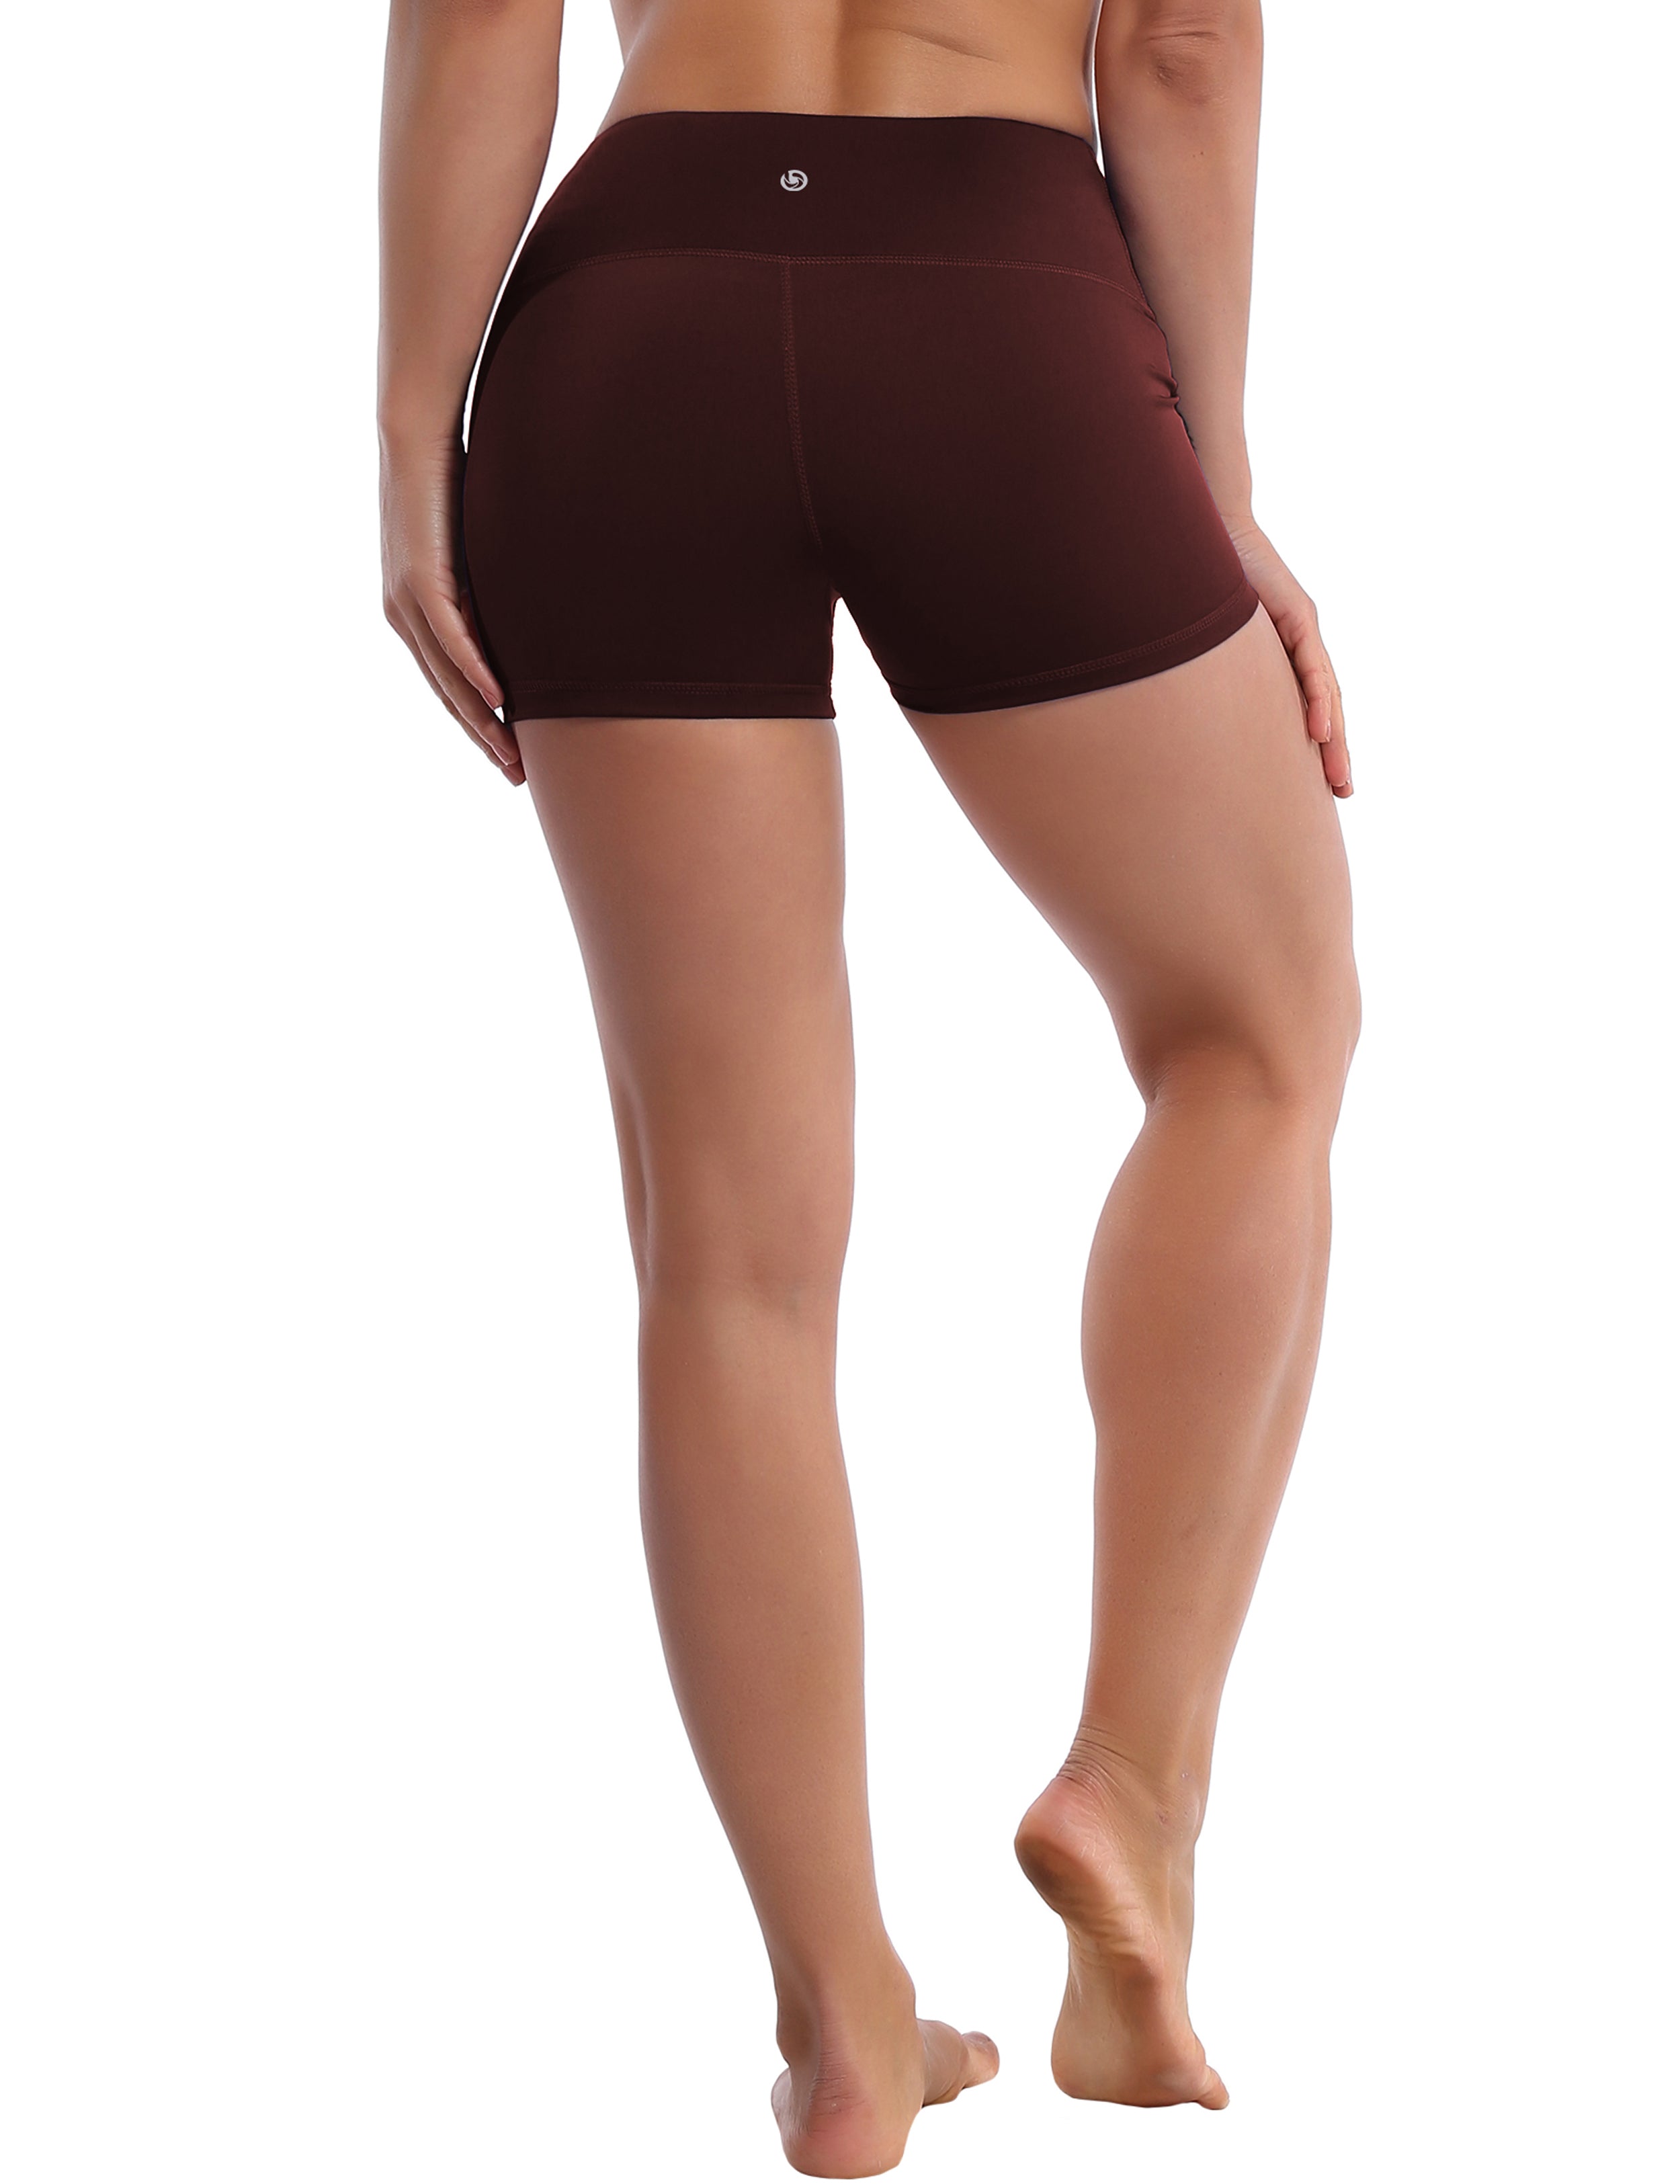 2.5" Running Shorts mahoganymaroon Softest-ever fabric High elasticity High density 4-way stretch Fabric doesn't attract lint easily No see-through Moisture-wicking Machine wash 75% Nylon, 25% Spandex